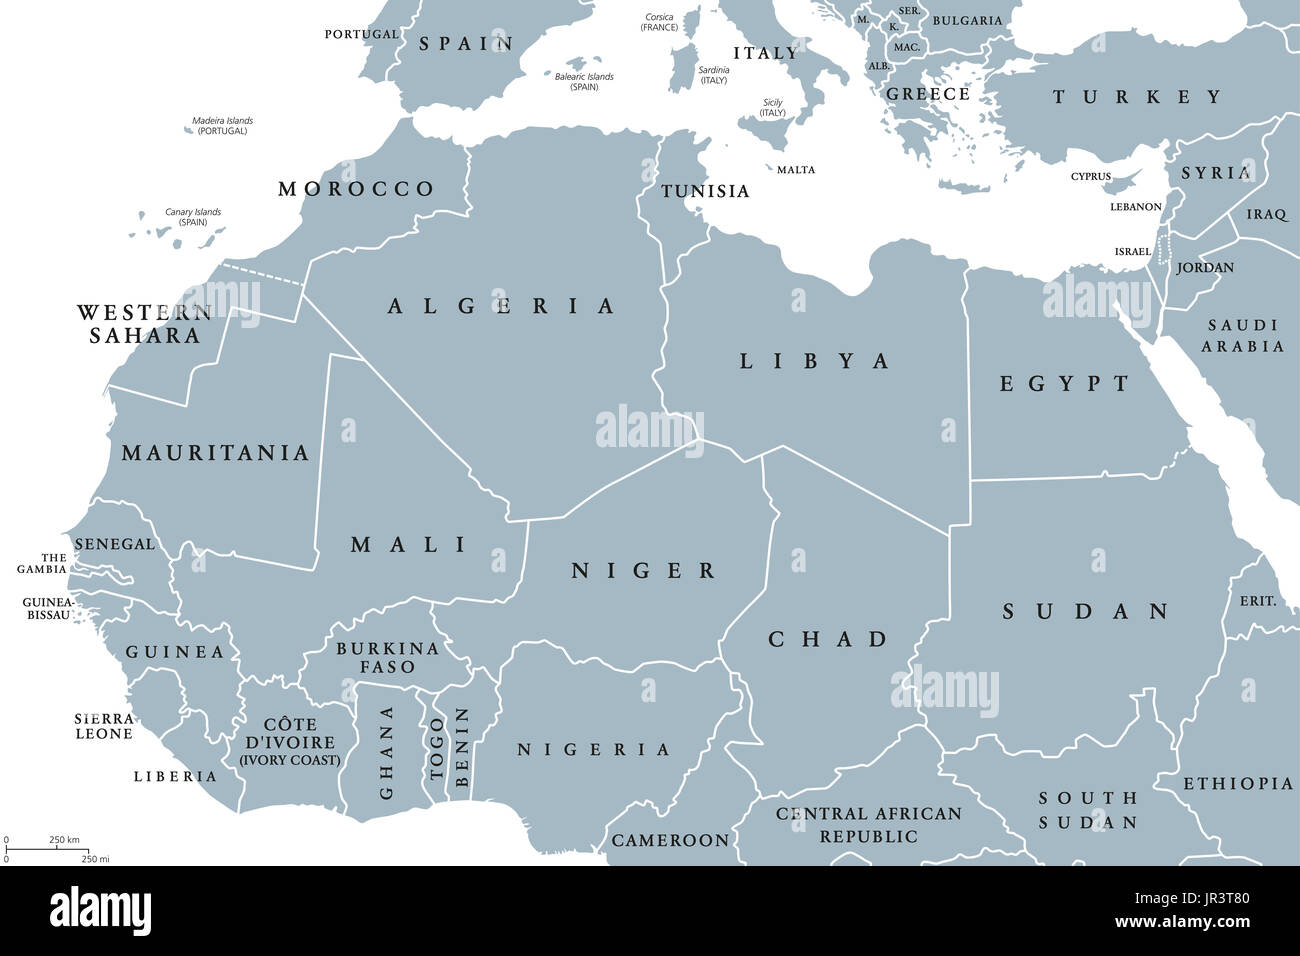 North Africa countries political map with borders. English labeling. From Atlantic shores of Morocco to the Red Sea. Maghreb and Mediterranean. Stock Photo